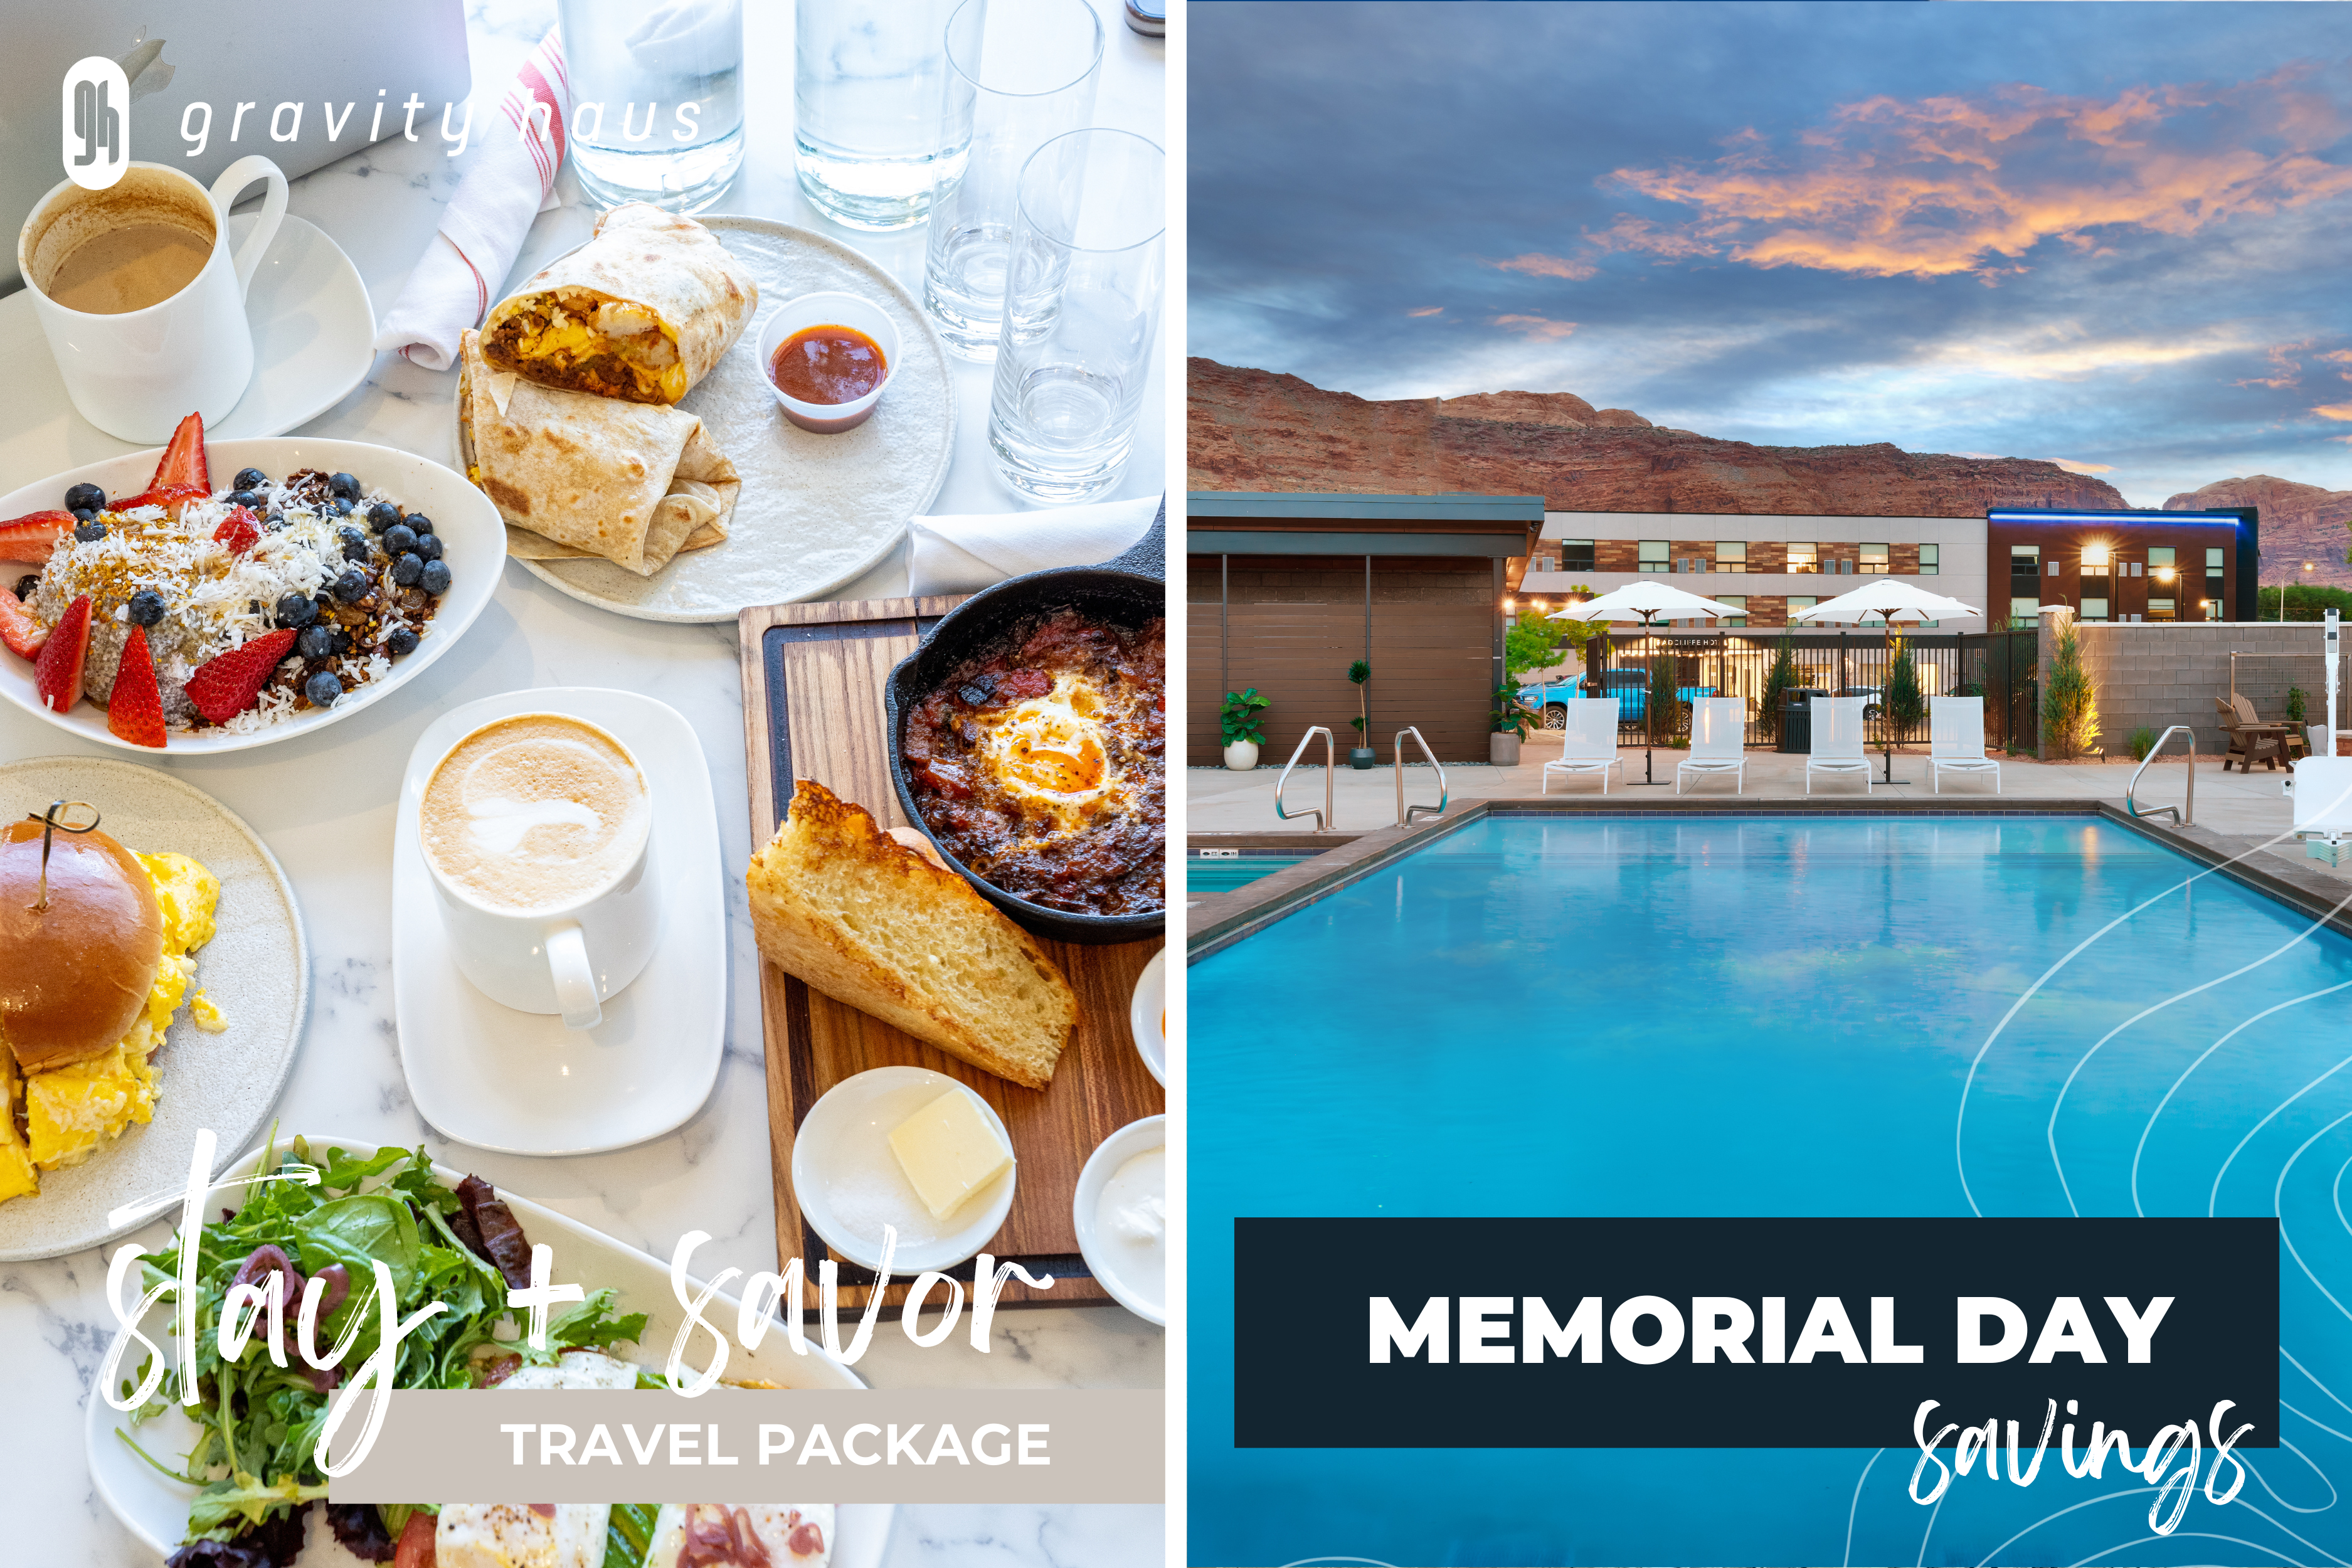 Gravity Haus Moab Stay + Savor and Memorial Day